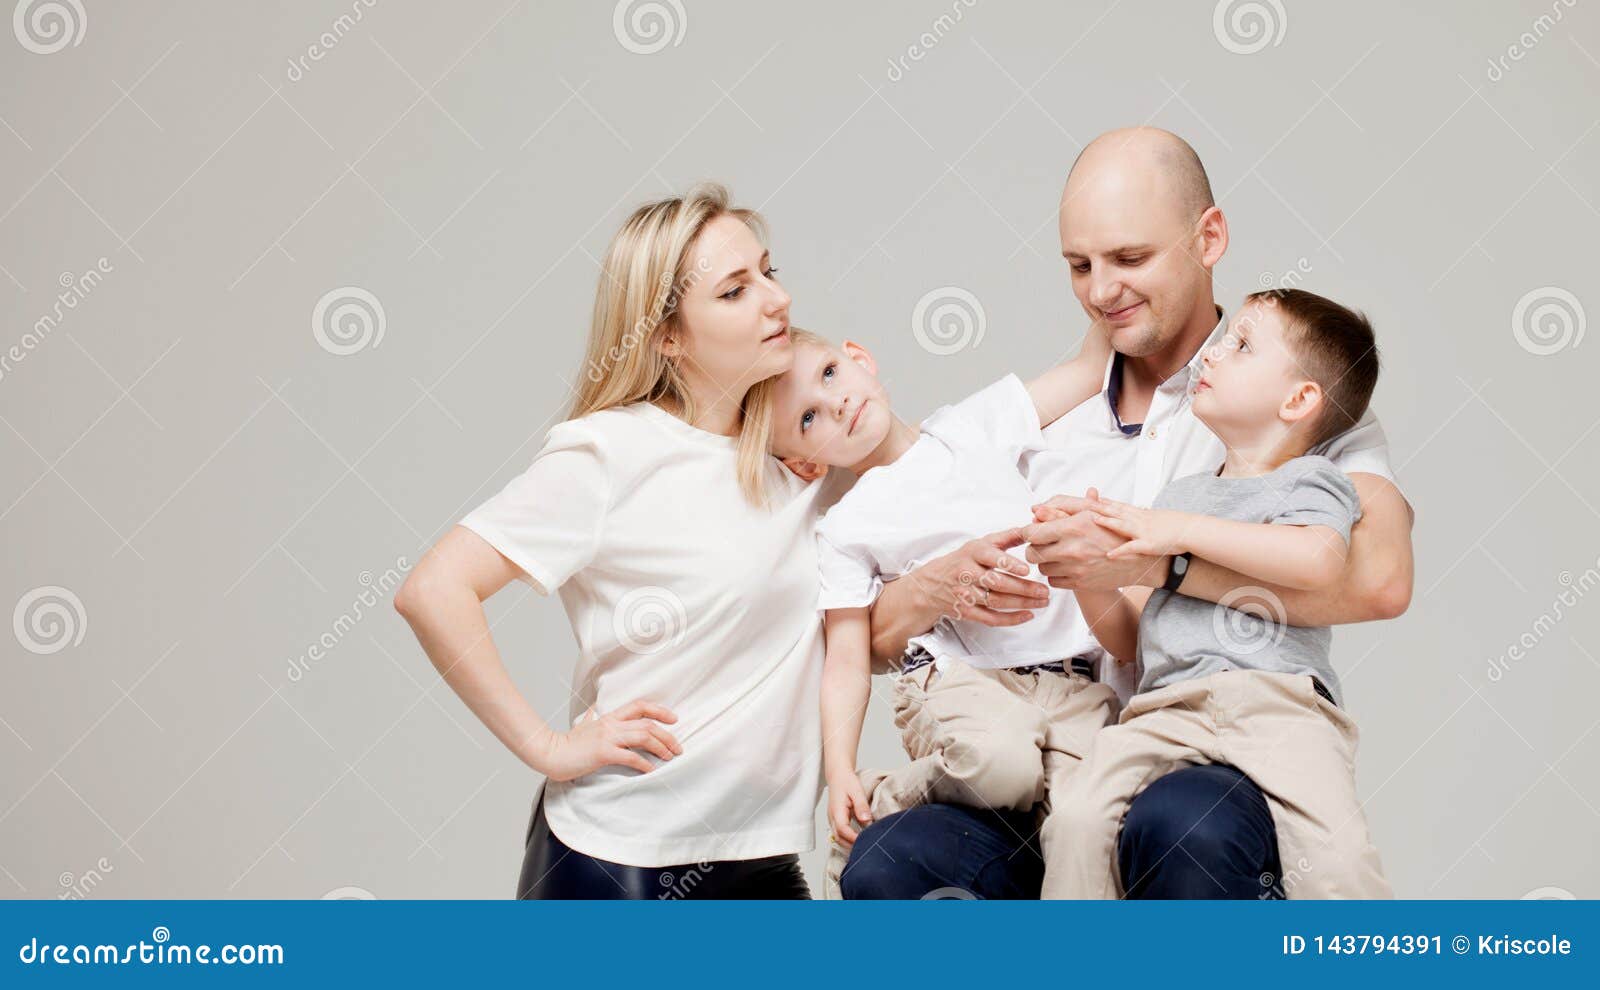 Big Family Parents And Sons Mom Dad And Two Boys Stock Image